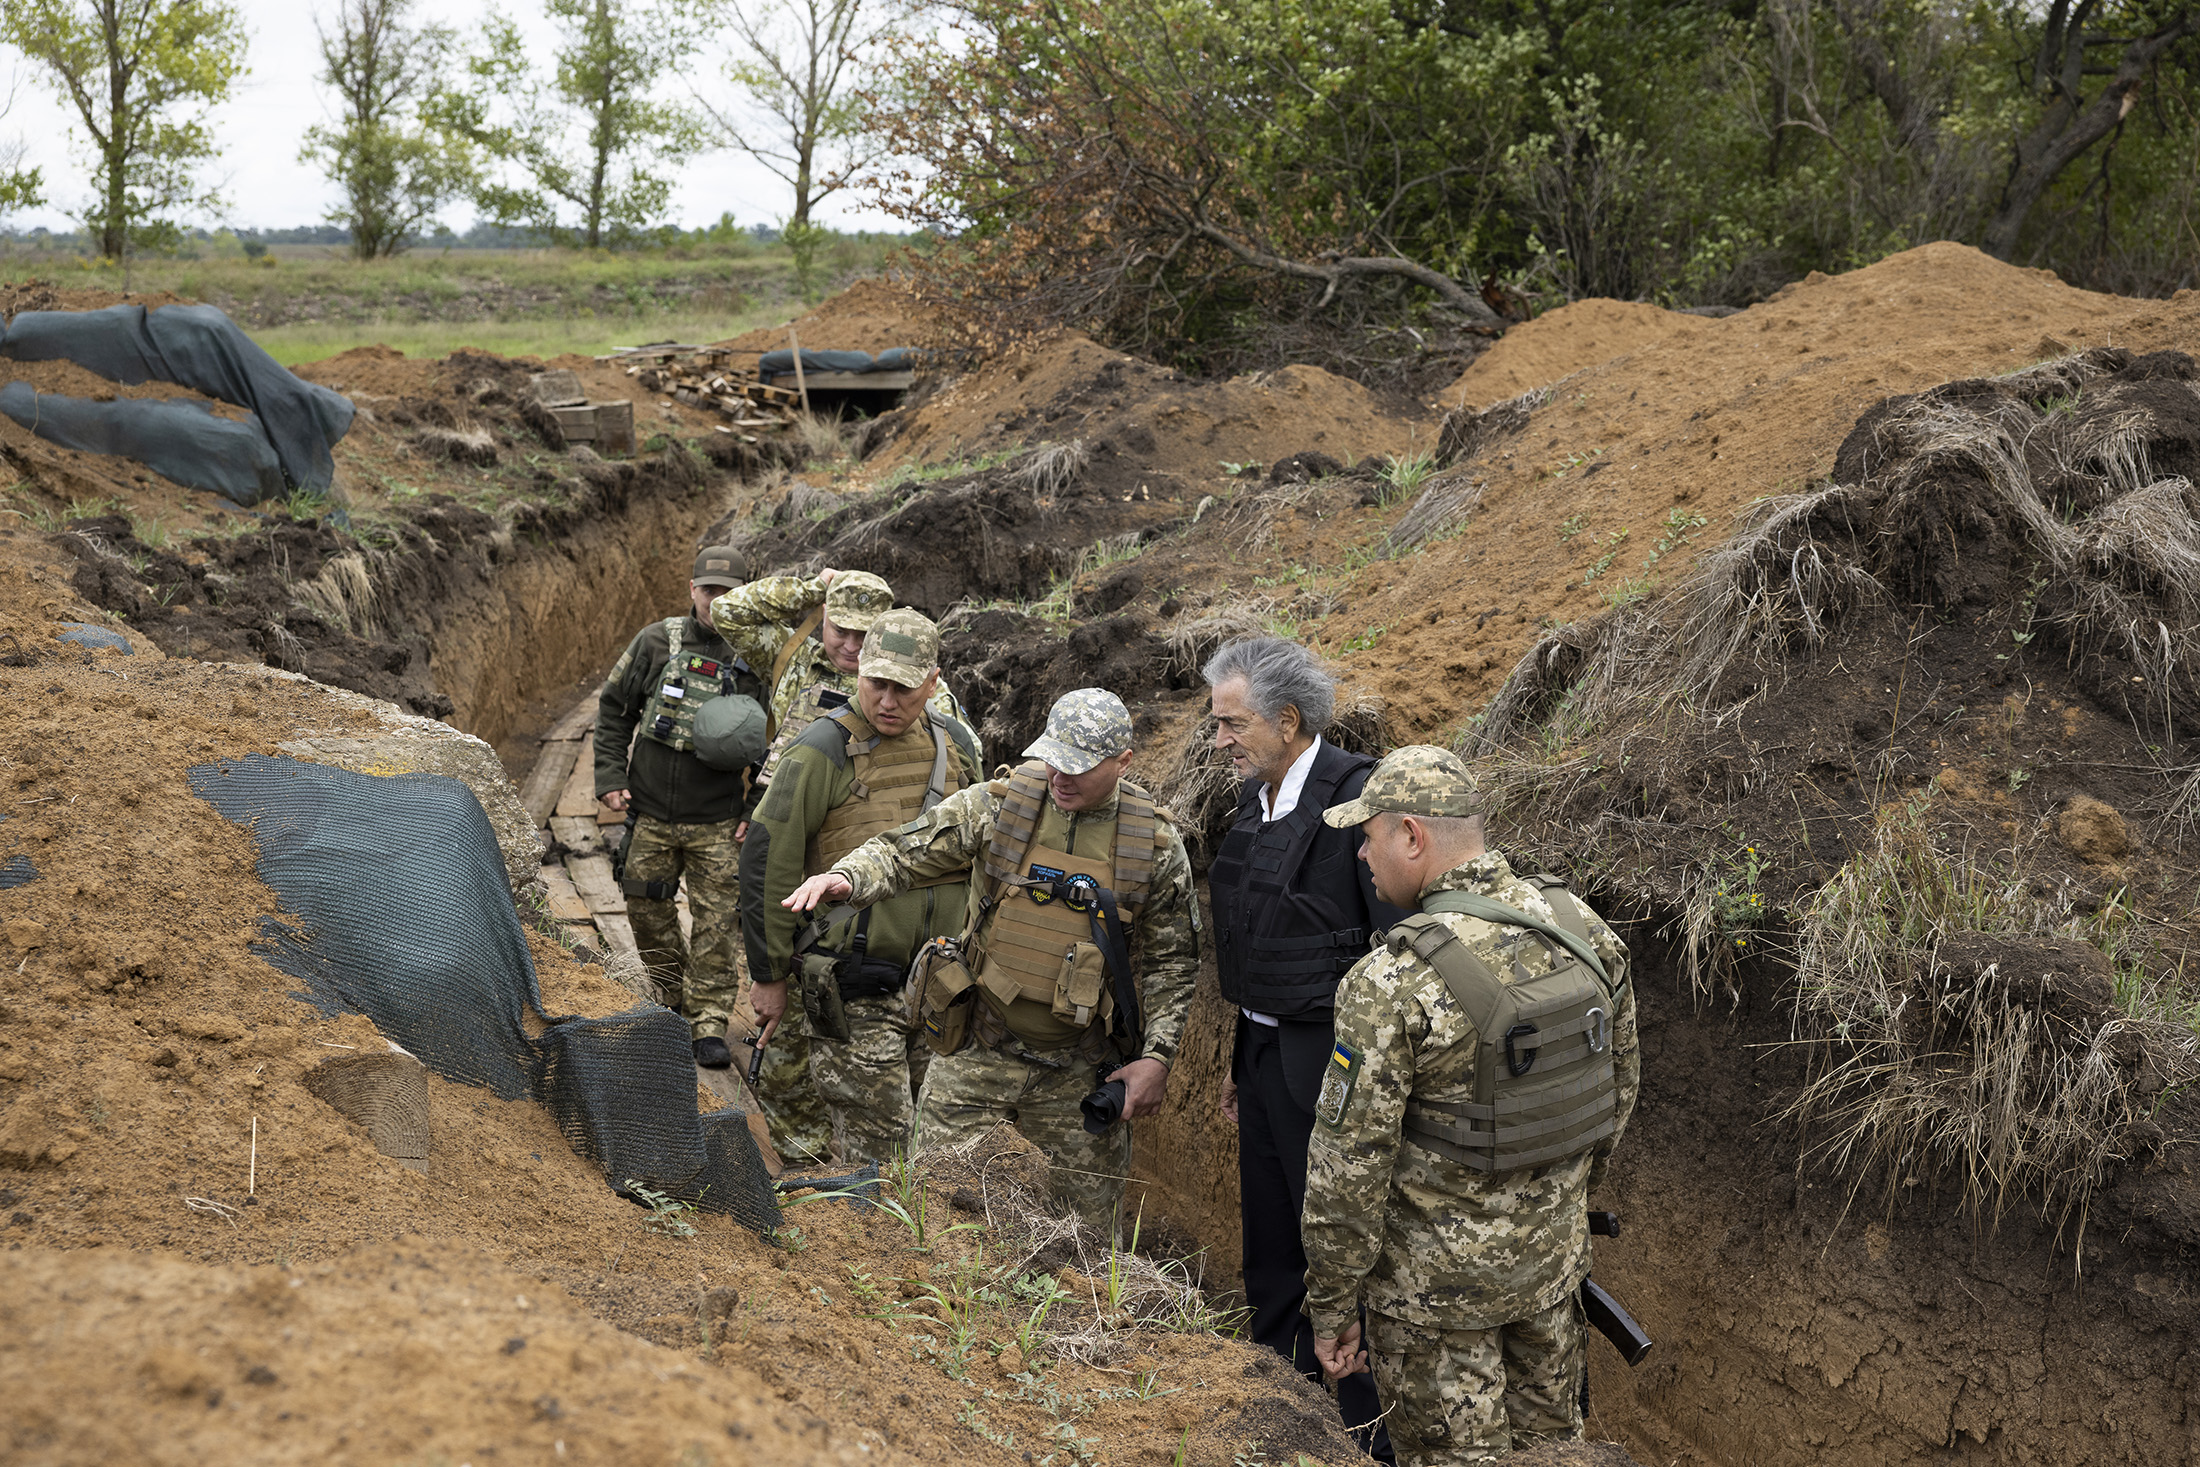 BHL in the trenches of Kherson.